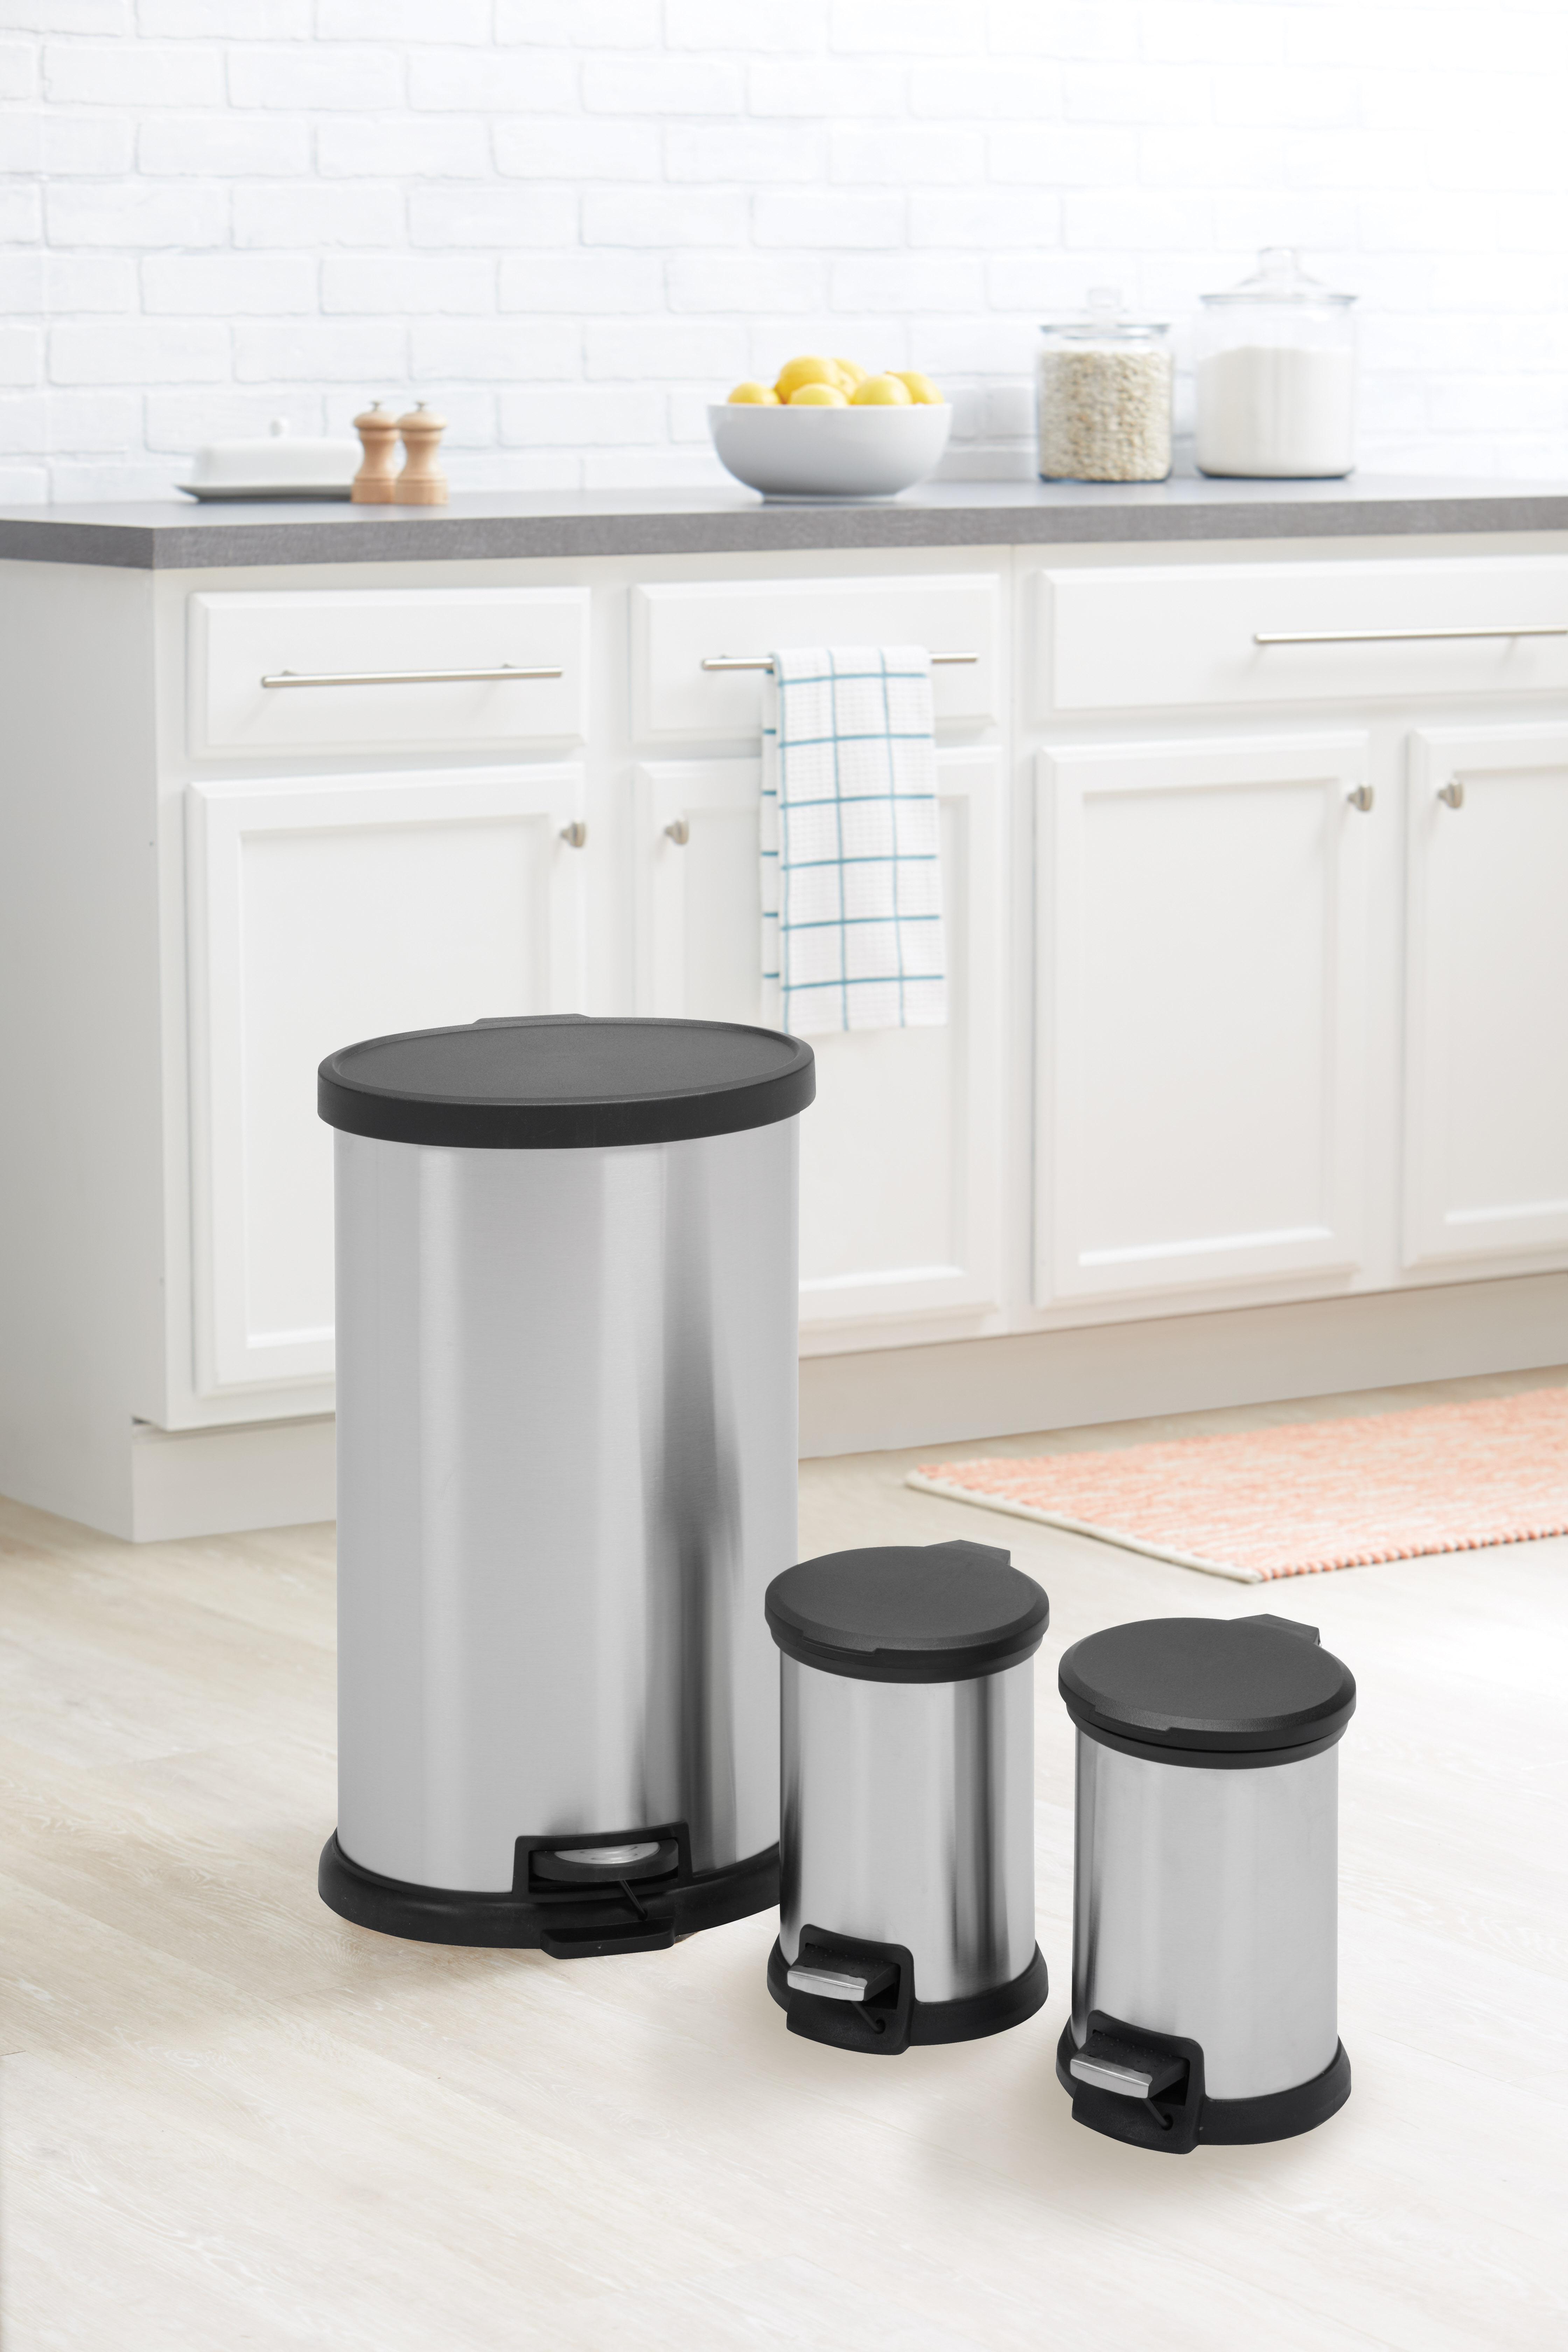 Mainstays 3-Piece Stainless Steel 1.3 and 8 gal Kitchen Garbage Can Combo - image 4 of 7